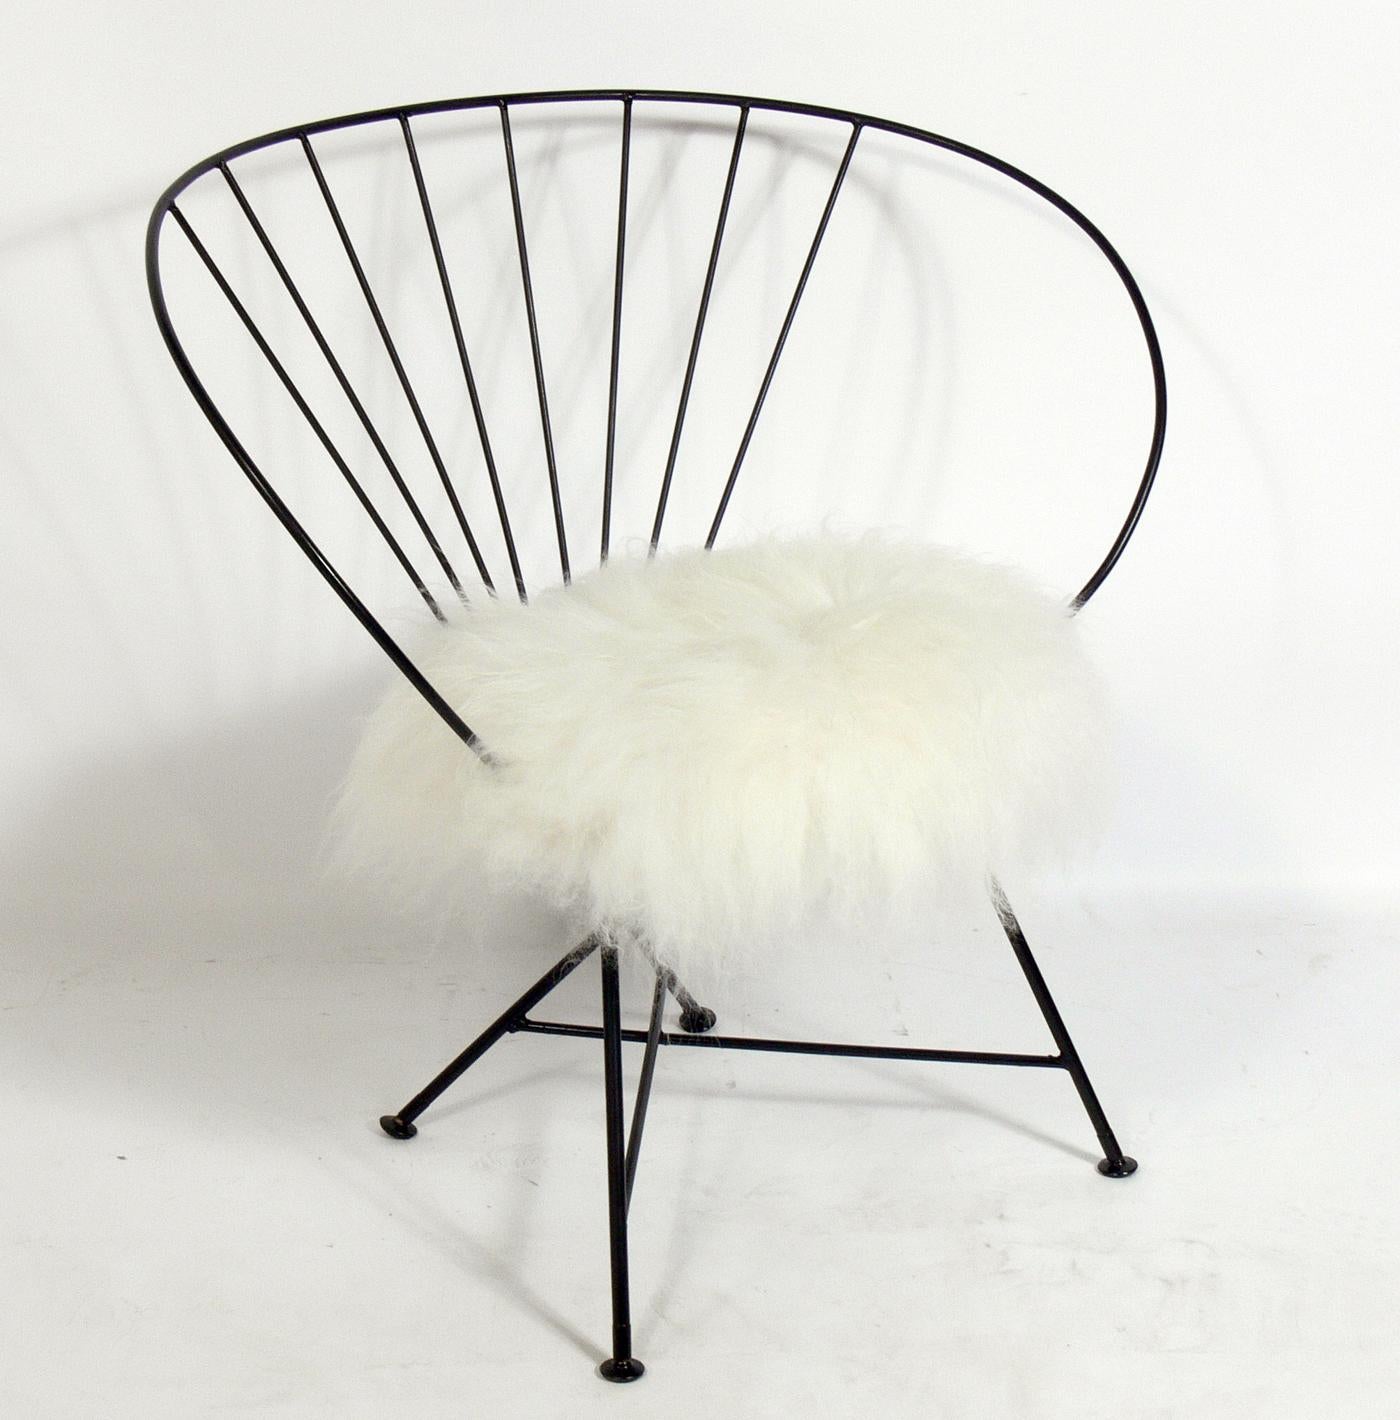 Sculptural iron lounge chair in Faux Fur, American, circa 1950s. It has been repainted and reupholstered in faux sheepskin. Sculptural form looks great from every angle!